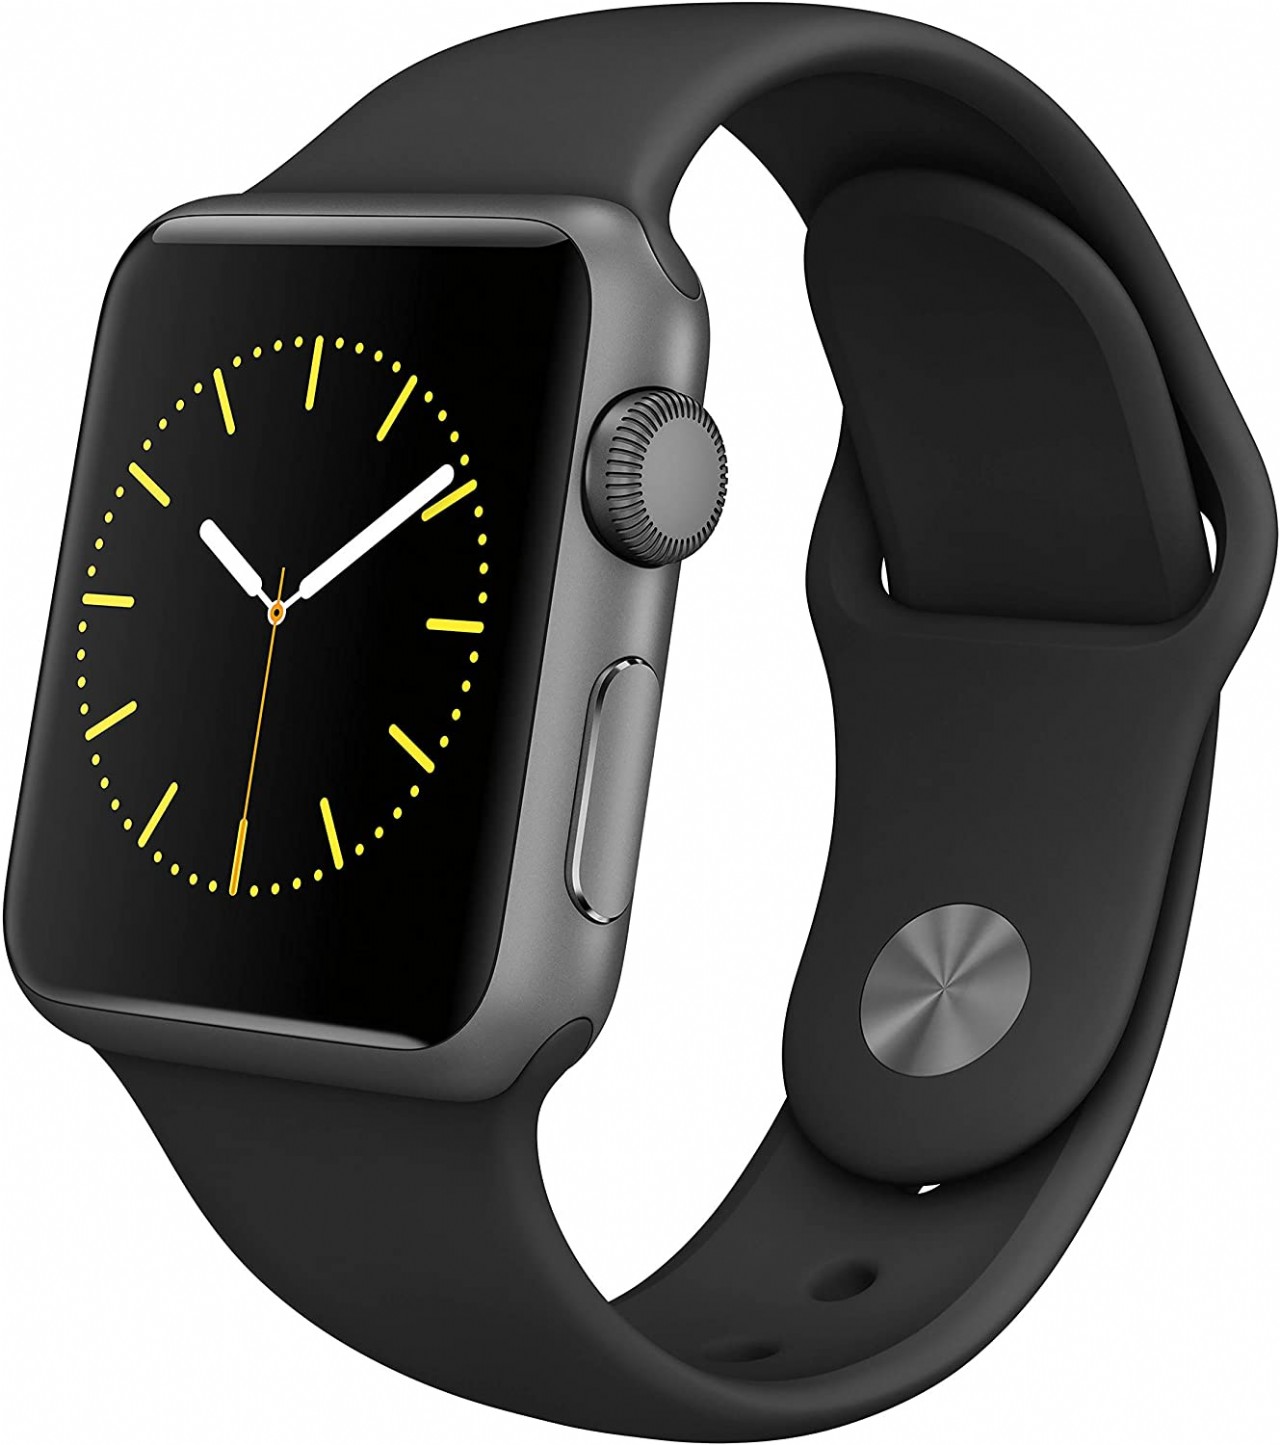 Apple Watch Series 1 (GPS, 42MM) - Space Gray Aluminum Case with Black Sport Band (Renewed)